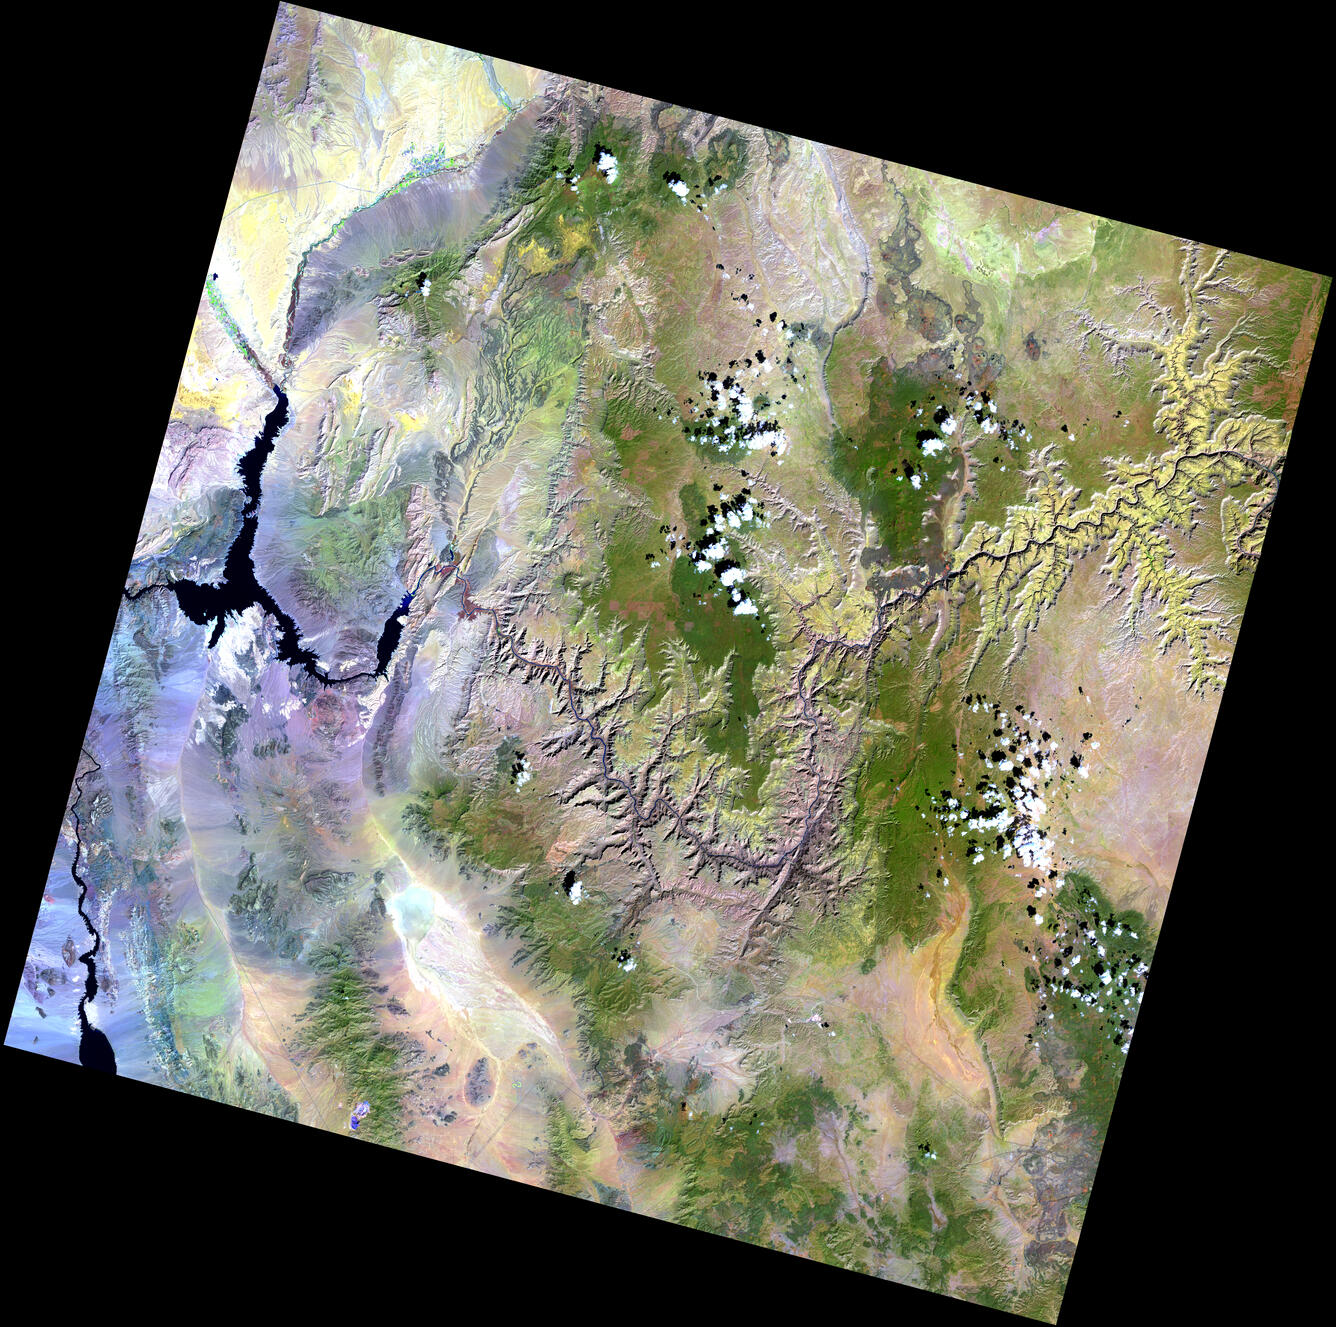 Landsat 8 Path 38 Row 35, Acquired March 29, 2013. 